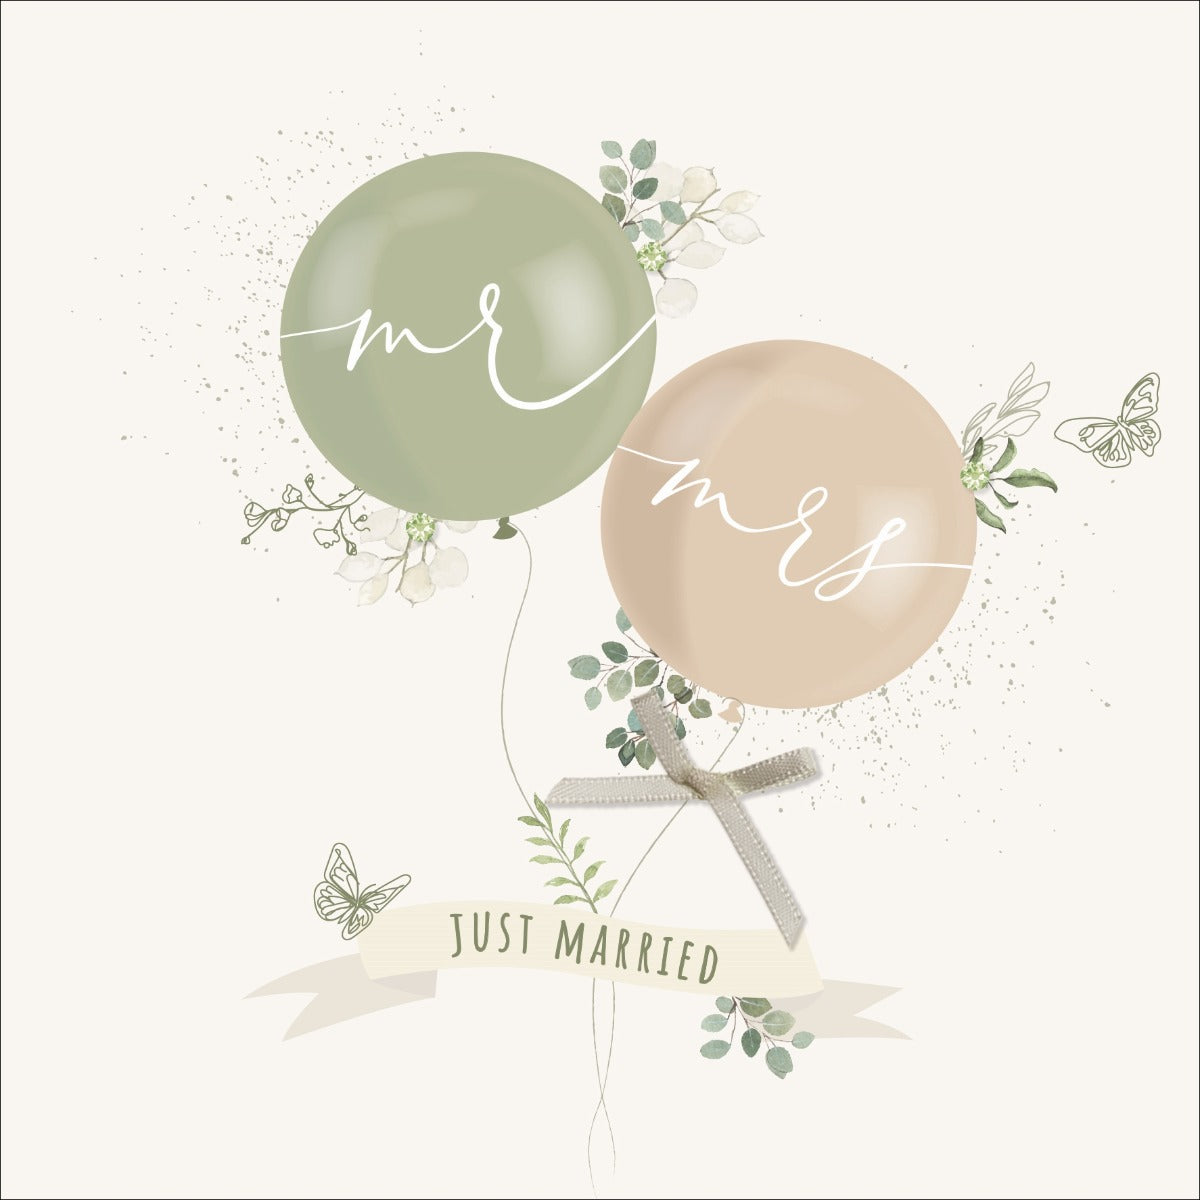 Besotted - Mr & Mrs Just Married Card